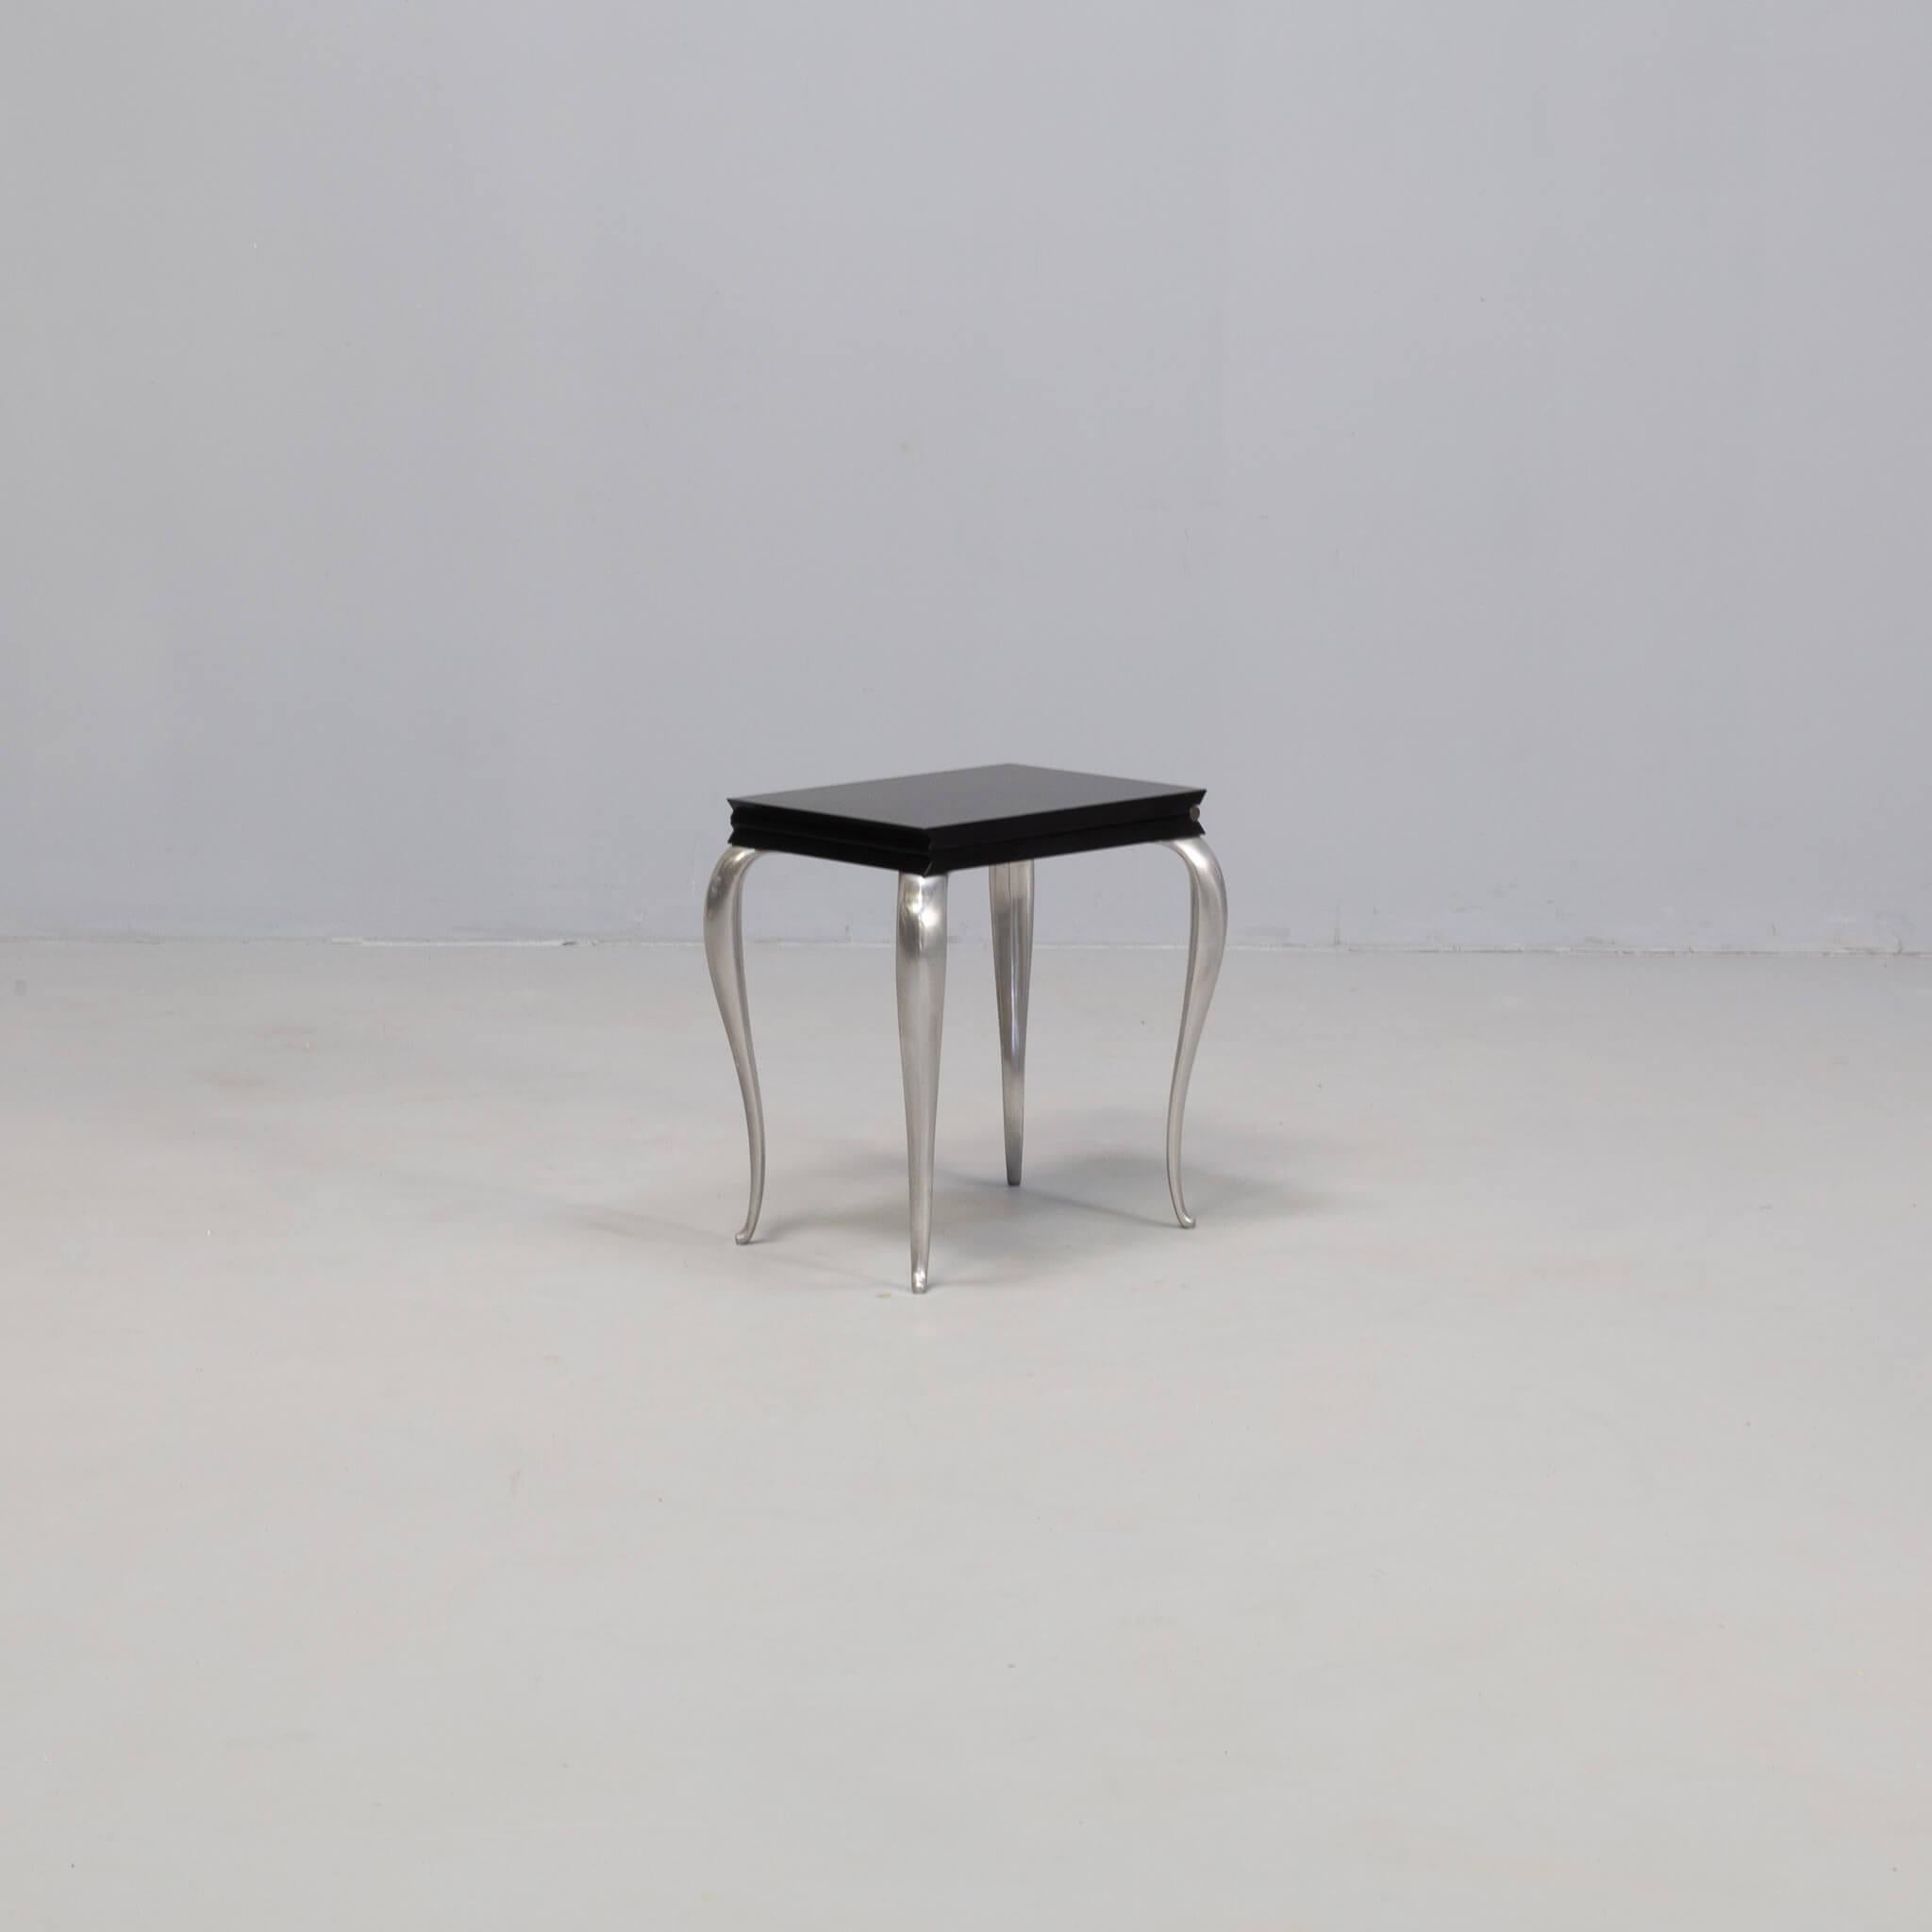 Small coffee table or chair, Lola Mundo adds several functions in a single piece of furniture. Philippe Starck presents it as follows: “Small coffee table, it becomes a chair when you open it. Want to see if you can make an object that works with an